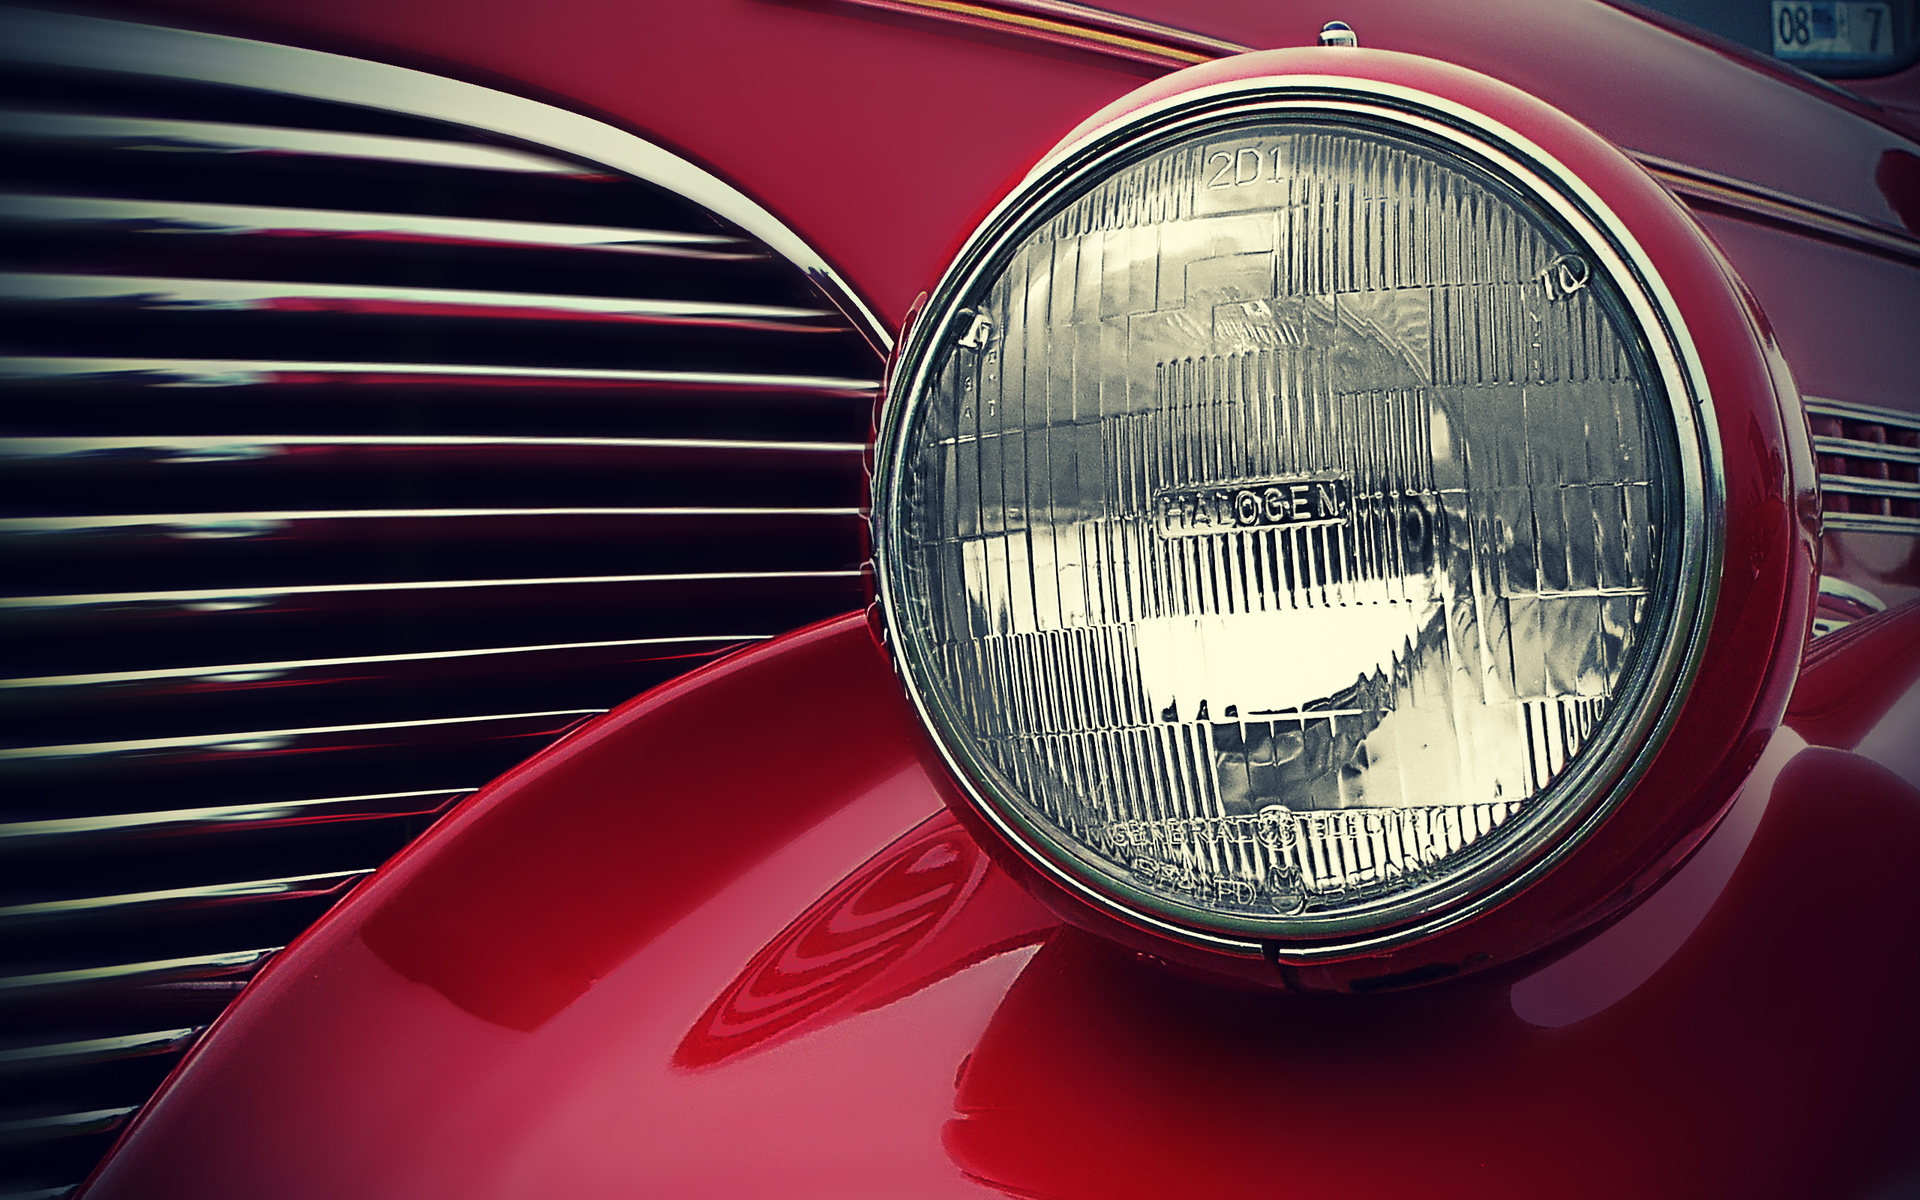 670+ Classic Car HD Wallpapers and Backgrounds